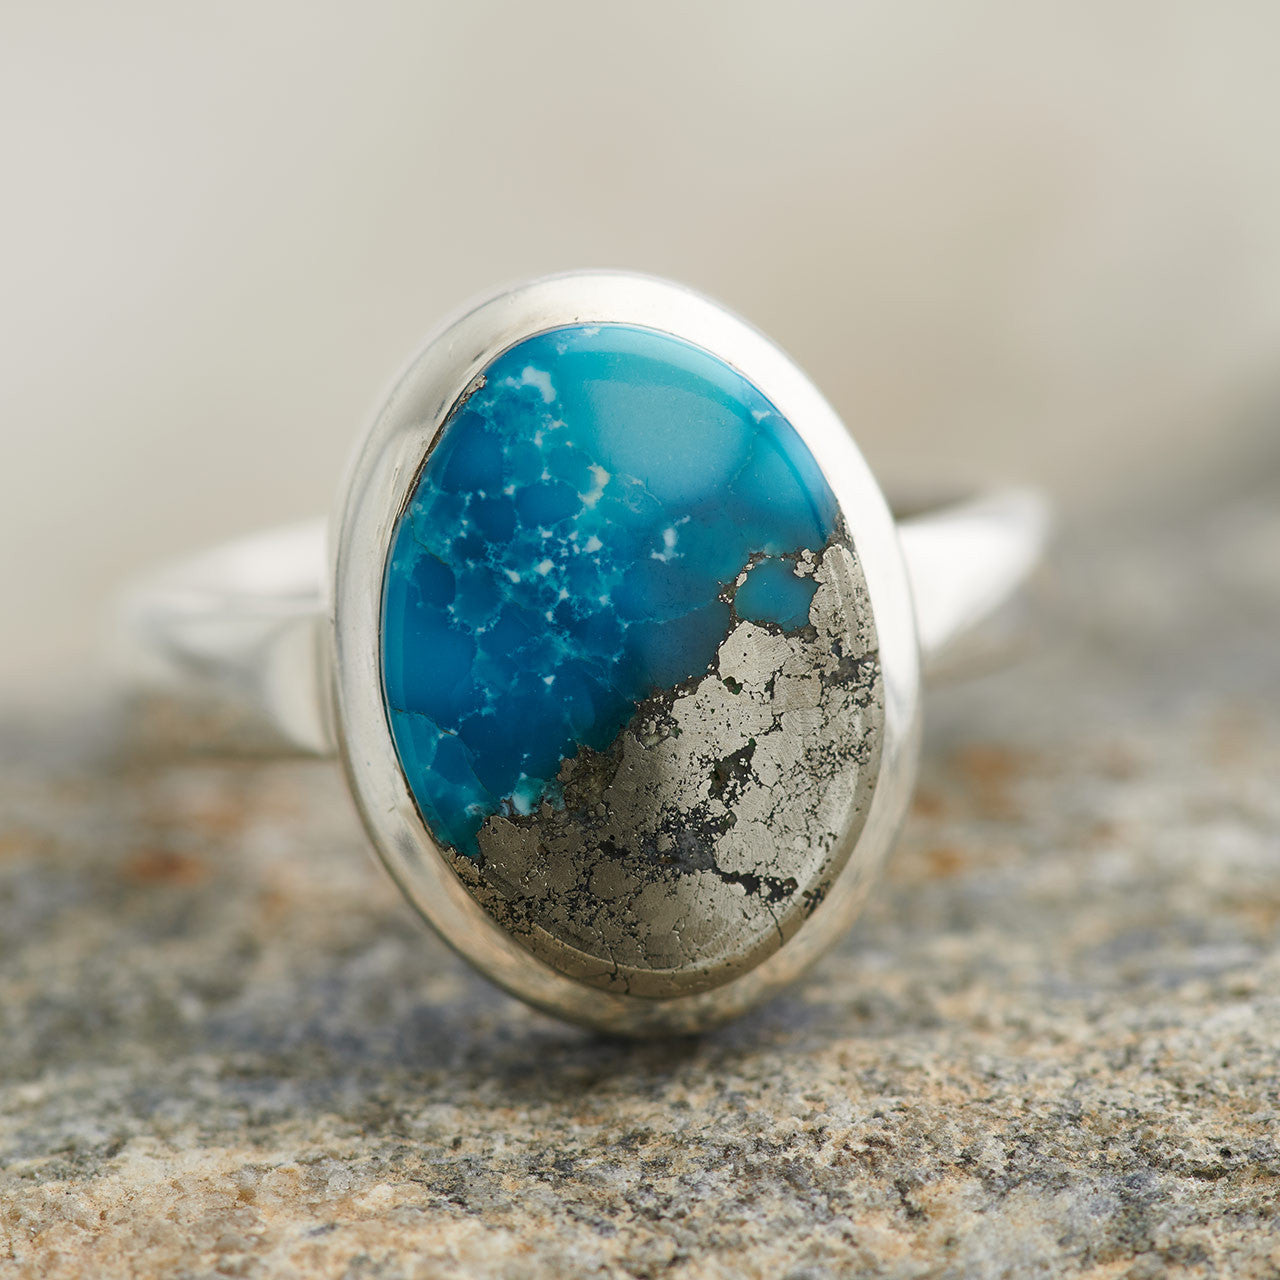 NATURAL IRANIAN TURQUOISE RING STERLING SILVER